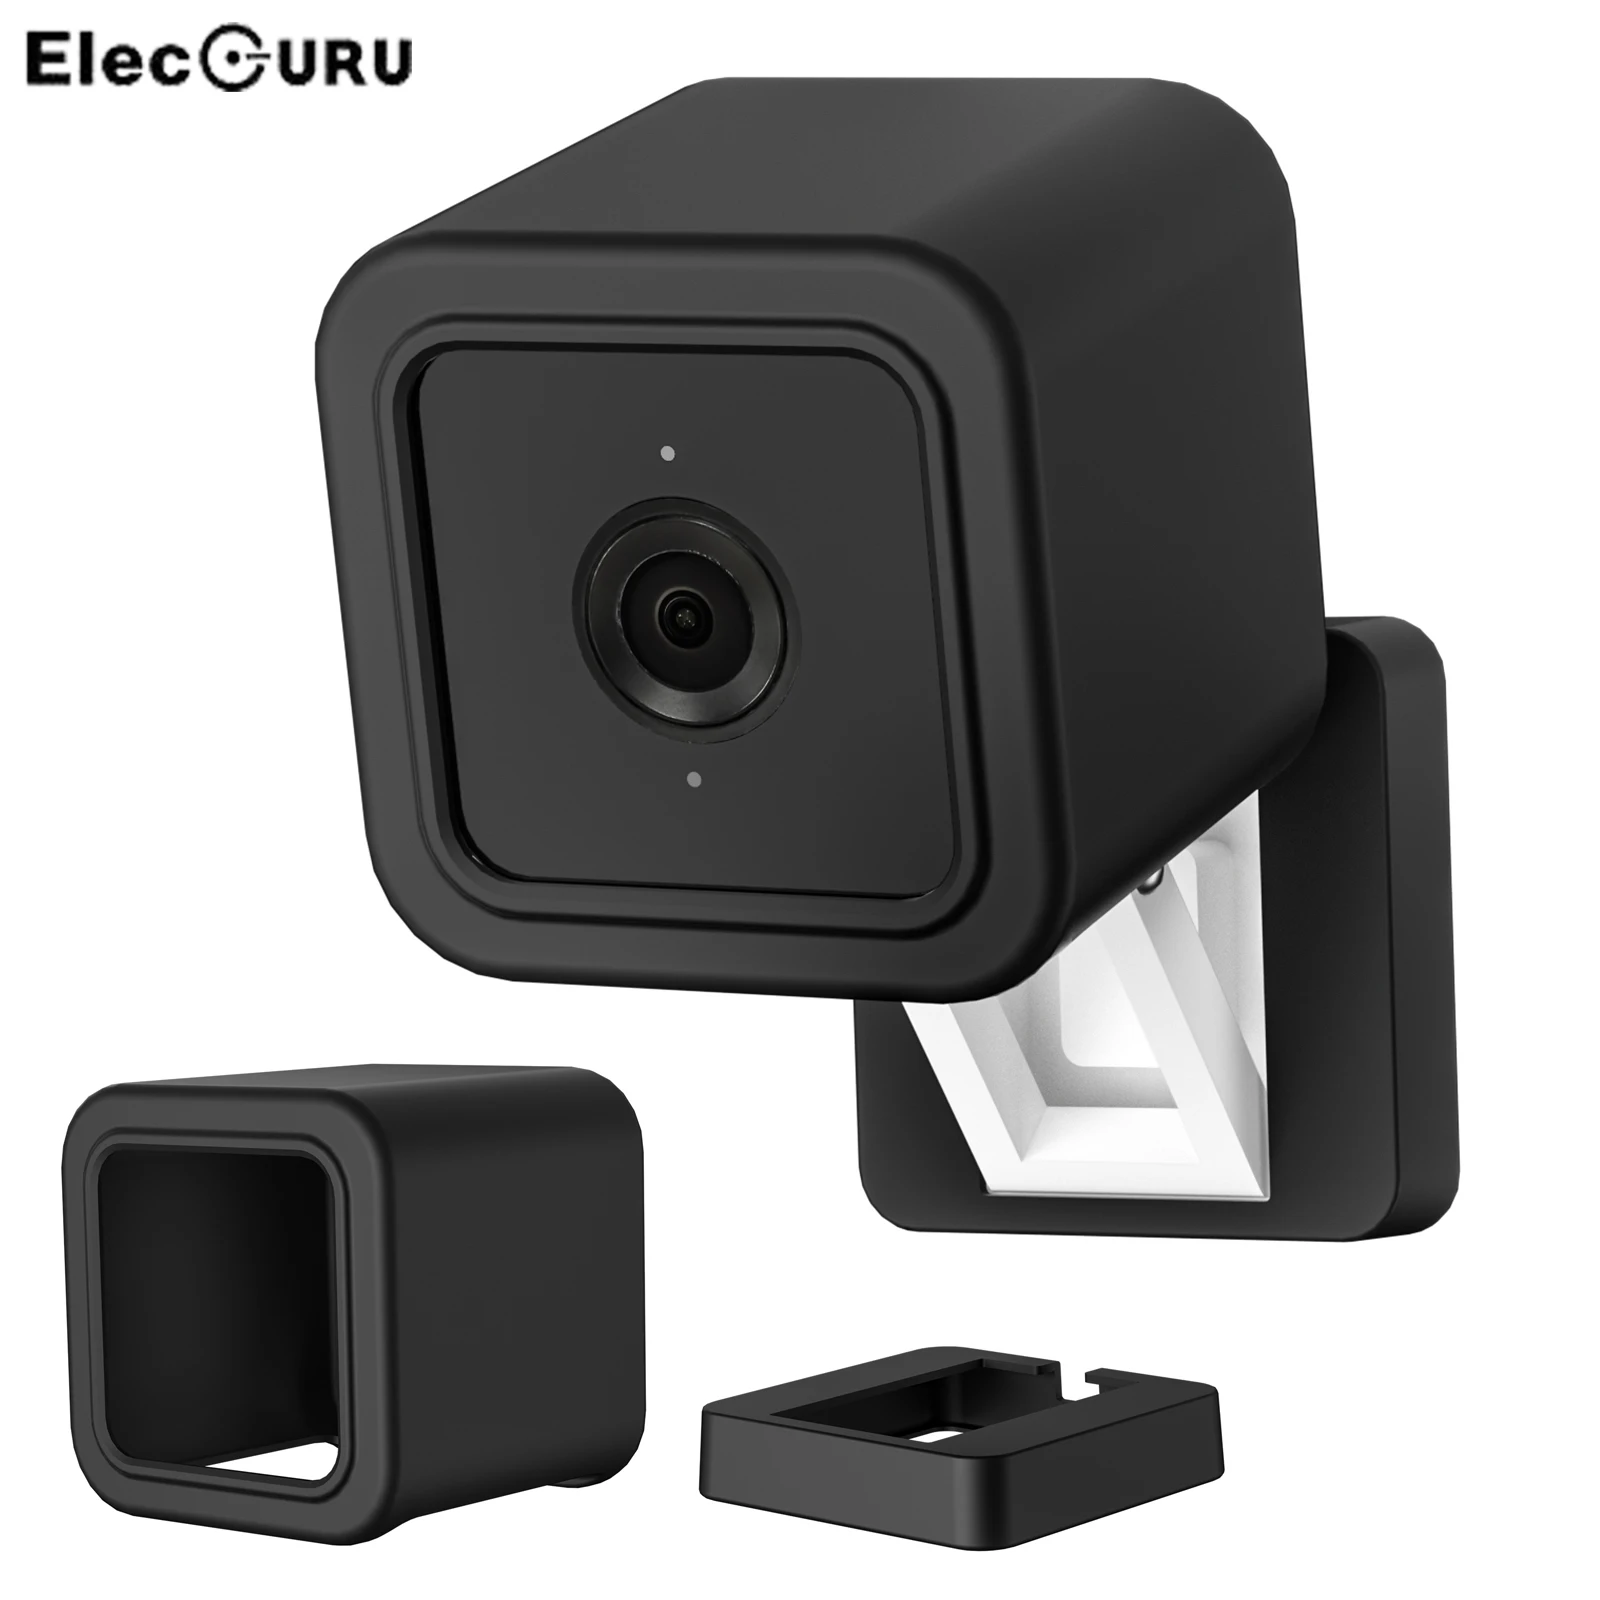 1Pack Black Anti-Scratch Protective Cover Extra Protect Wyze Cam v3 Camera HOLACA Silicone Skin for Wyze Cam v3- Come with Quick Wall Mount Bracket